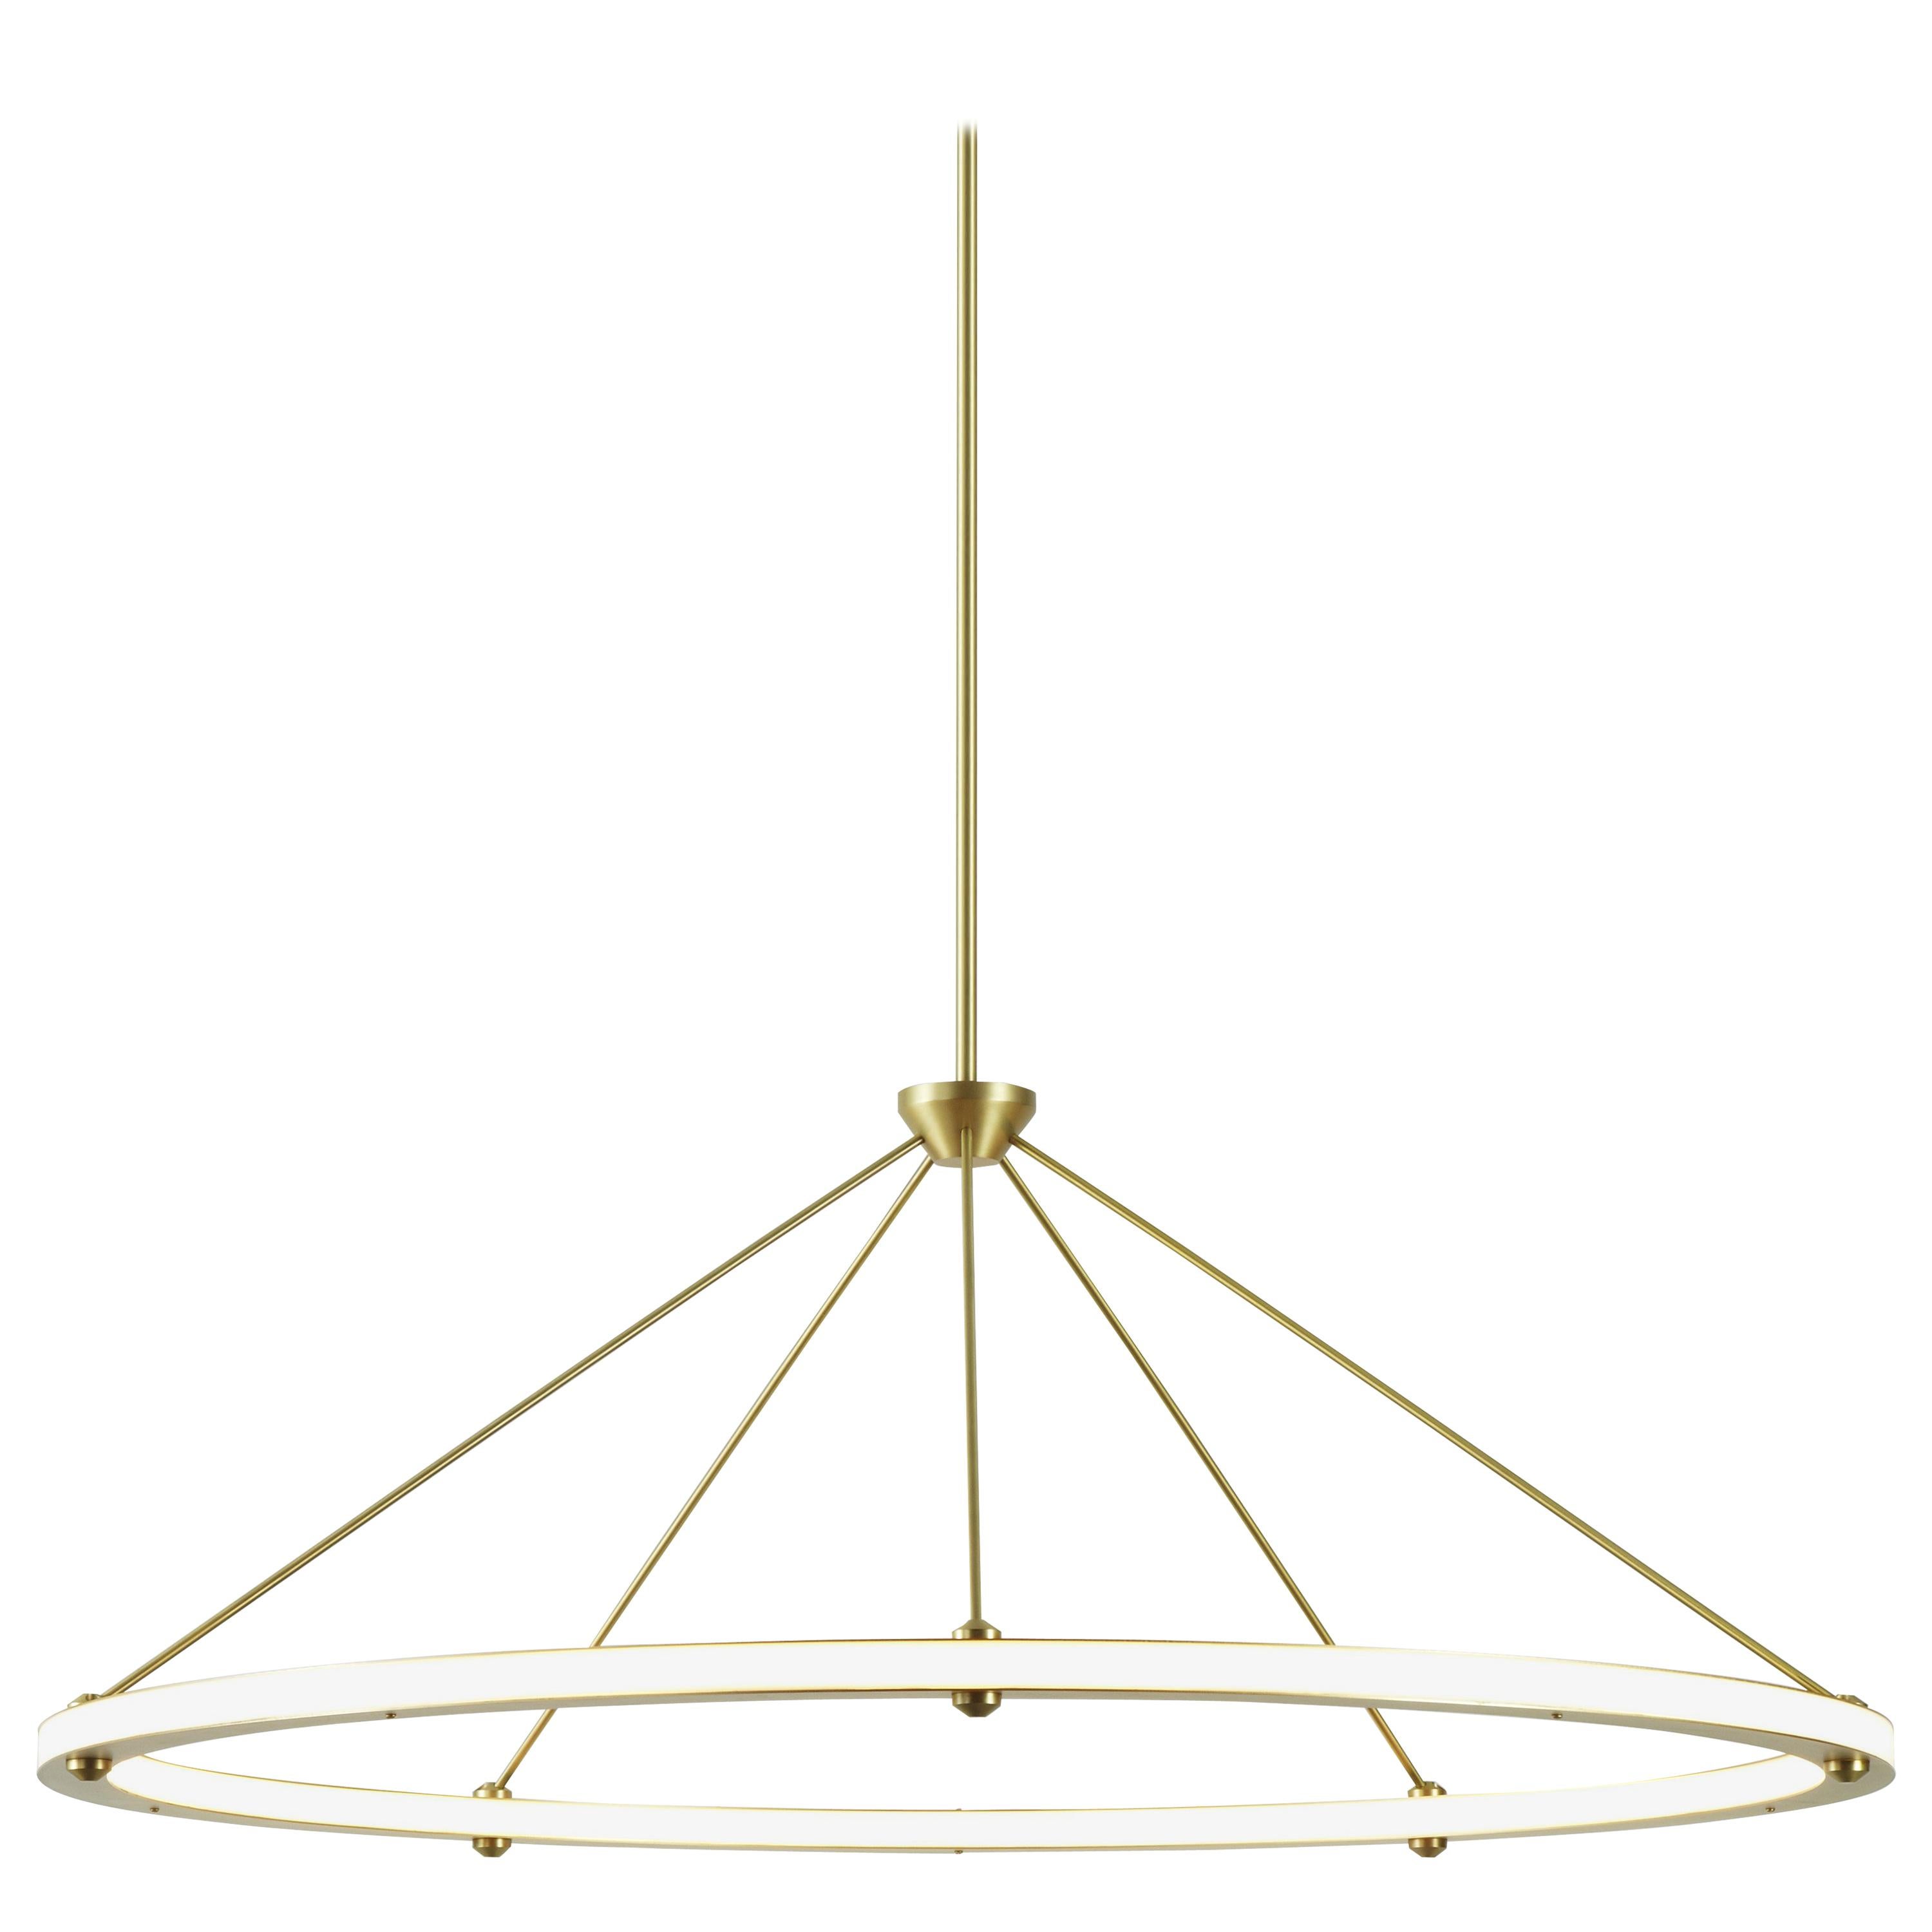 Halo Circle Pendant Light in Brass by Paul Loebach for Roll & Hill